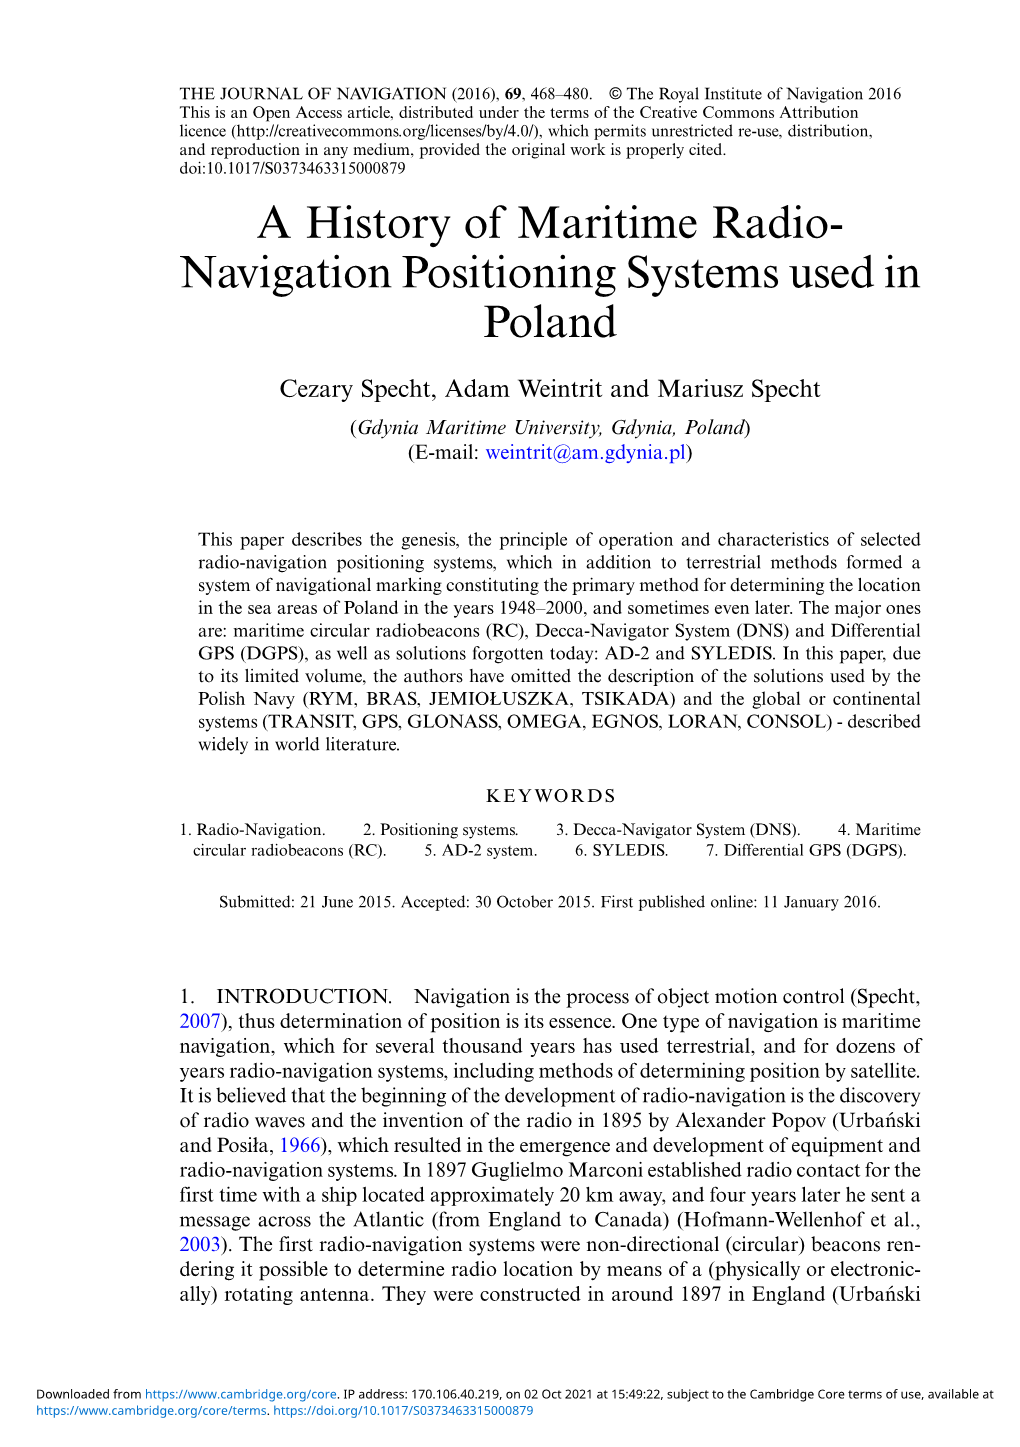 A History of Maritime Radio- Navigation Positioning Systems Used in Poland